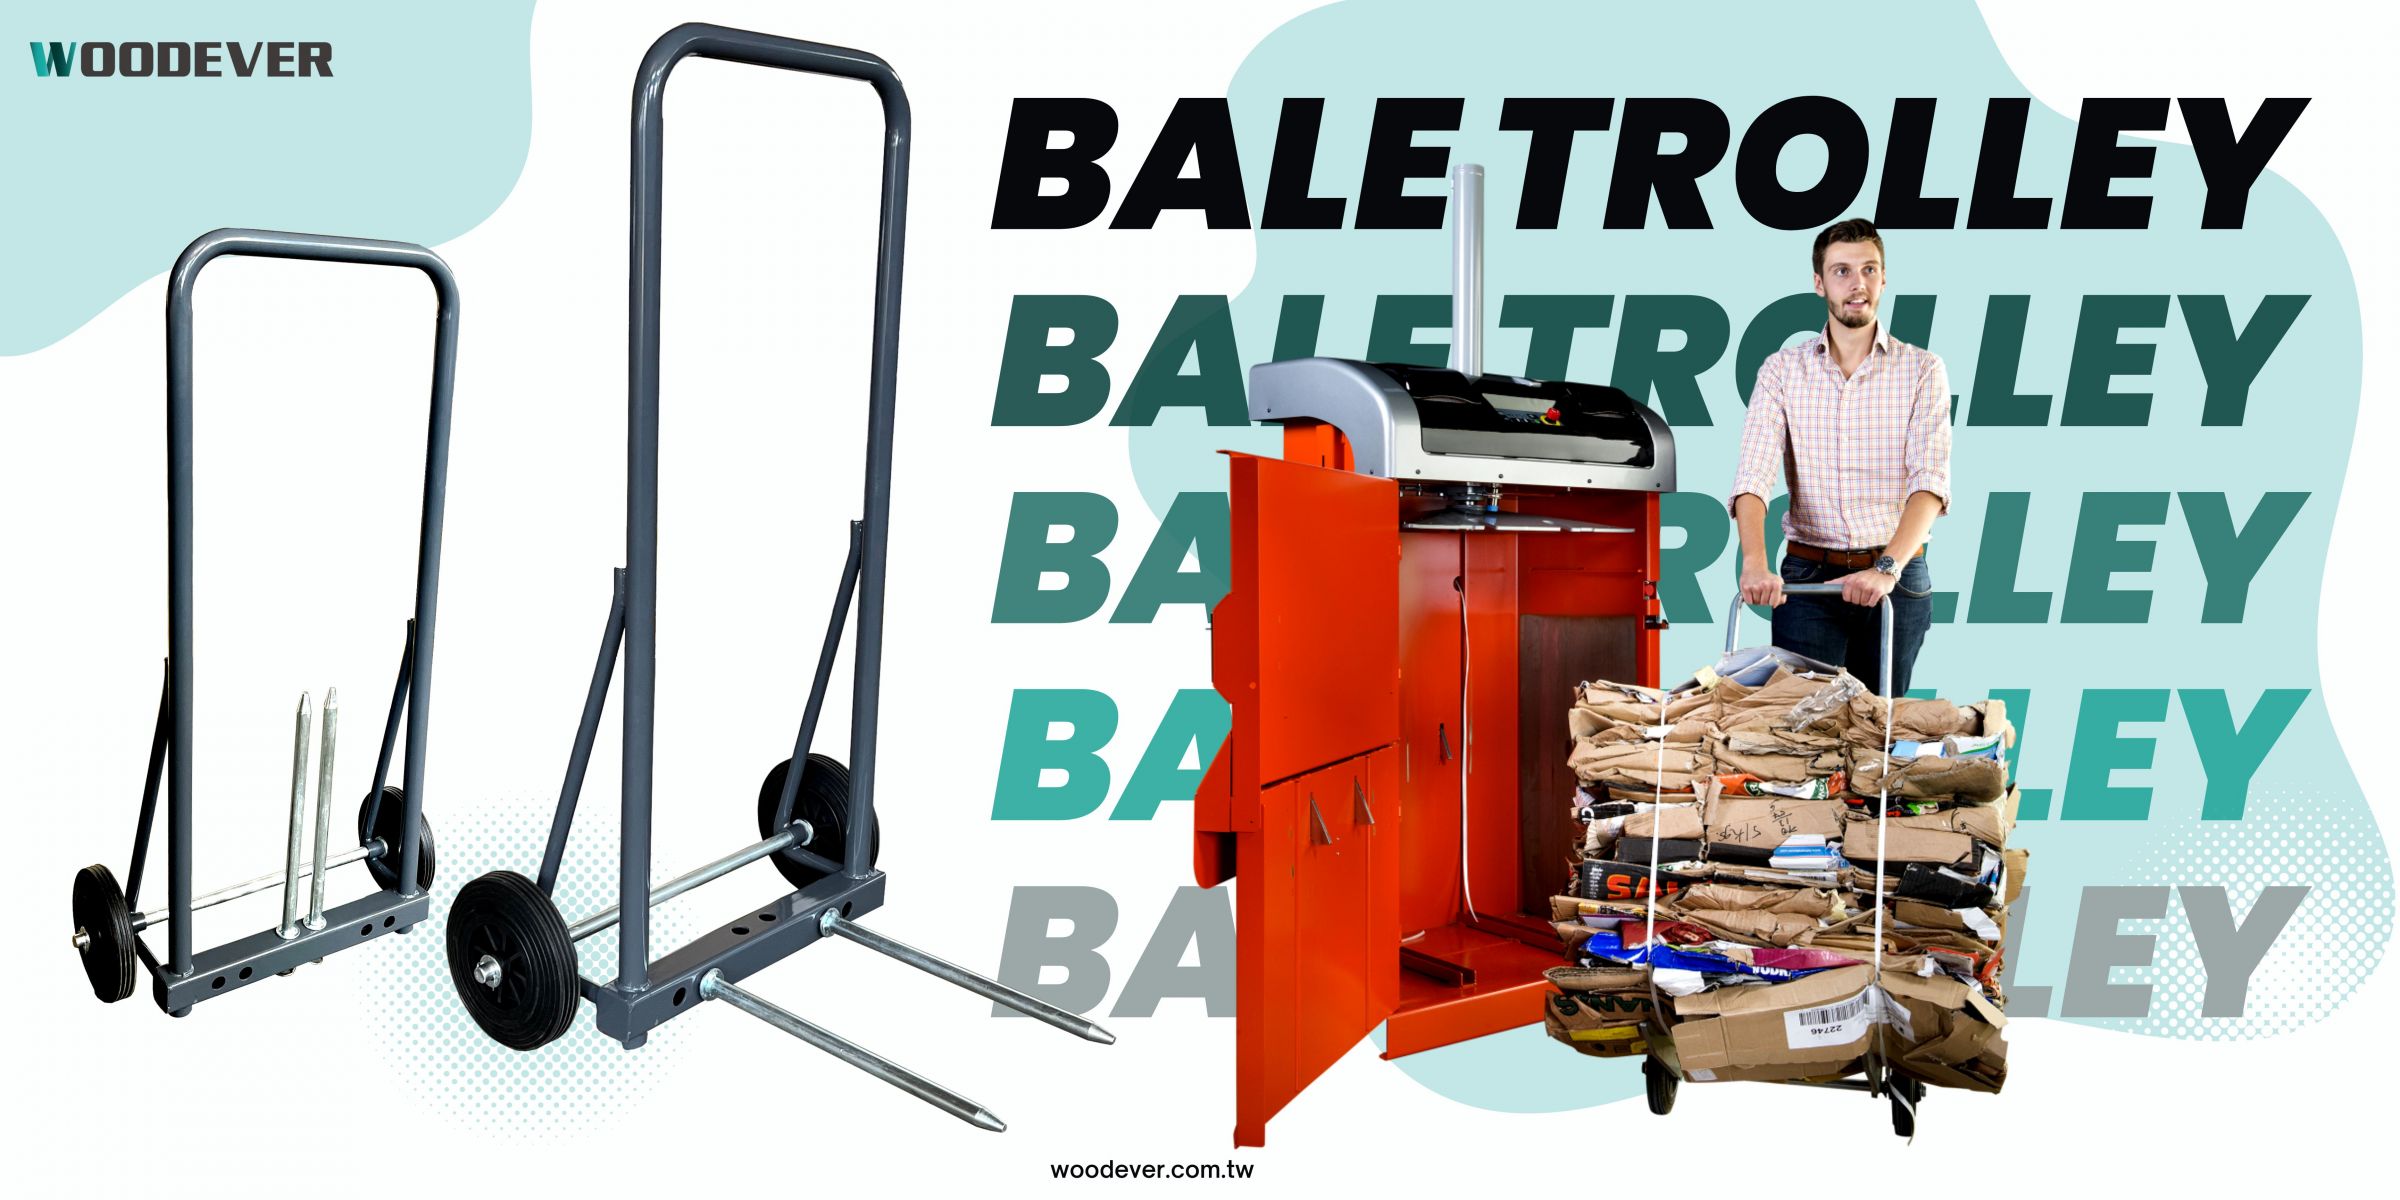 This customized trolley is a so-called BALE TROLLEY as it goes in set with baler machines.  The bale trolley function is to pull the stack of items (typically cardboard, plastics, papers, or cans) from the baller machines and transport them to warehouses or storage.